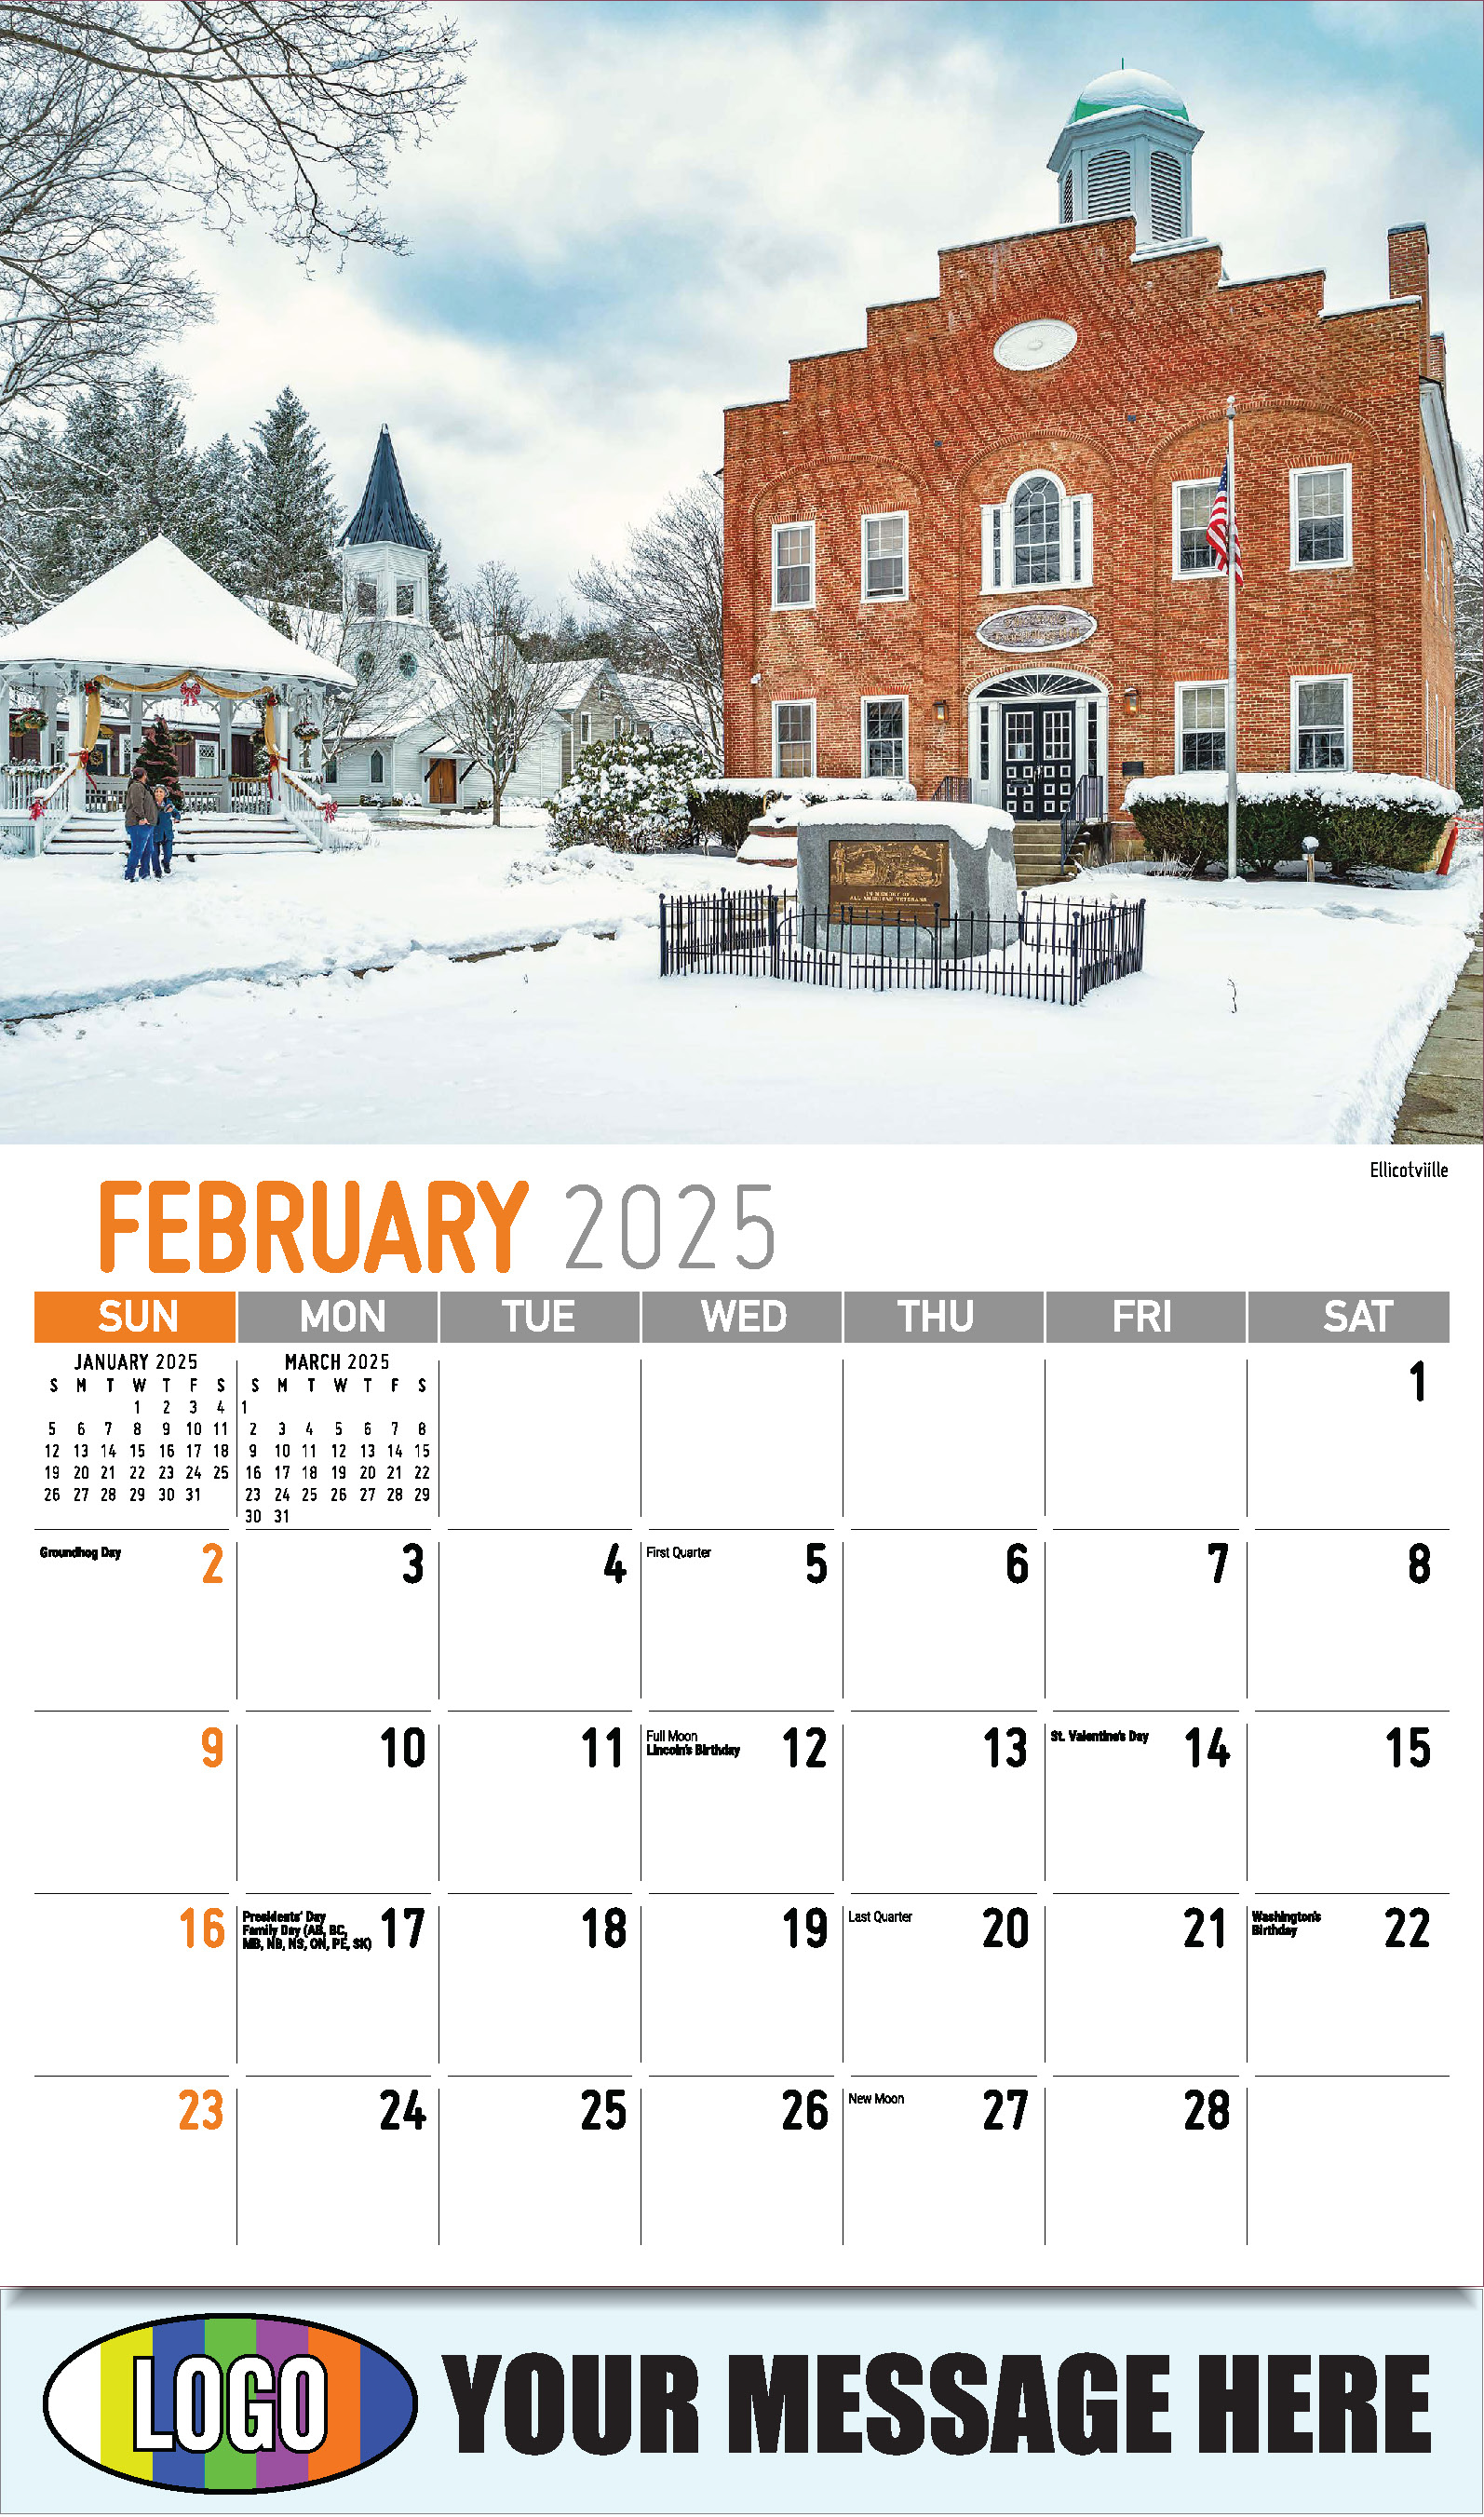 Scenes of New York 2025 Business Promotional Wall Calendar - February